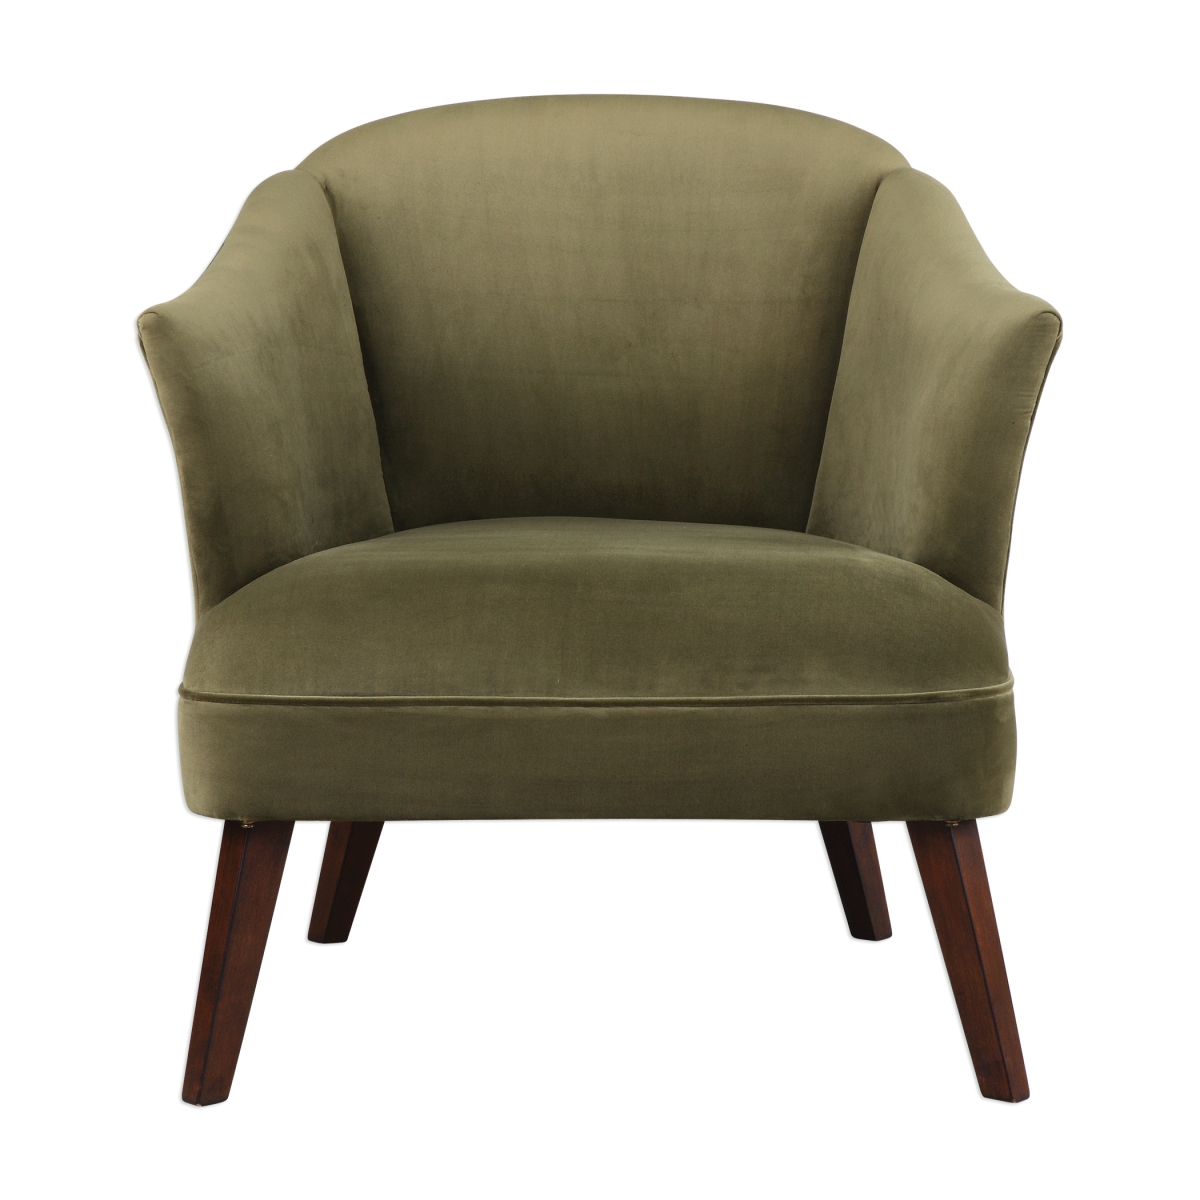 Picture of 212 Main 23321 Conroy Olive Accent Chair